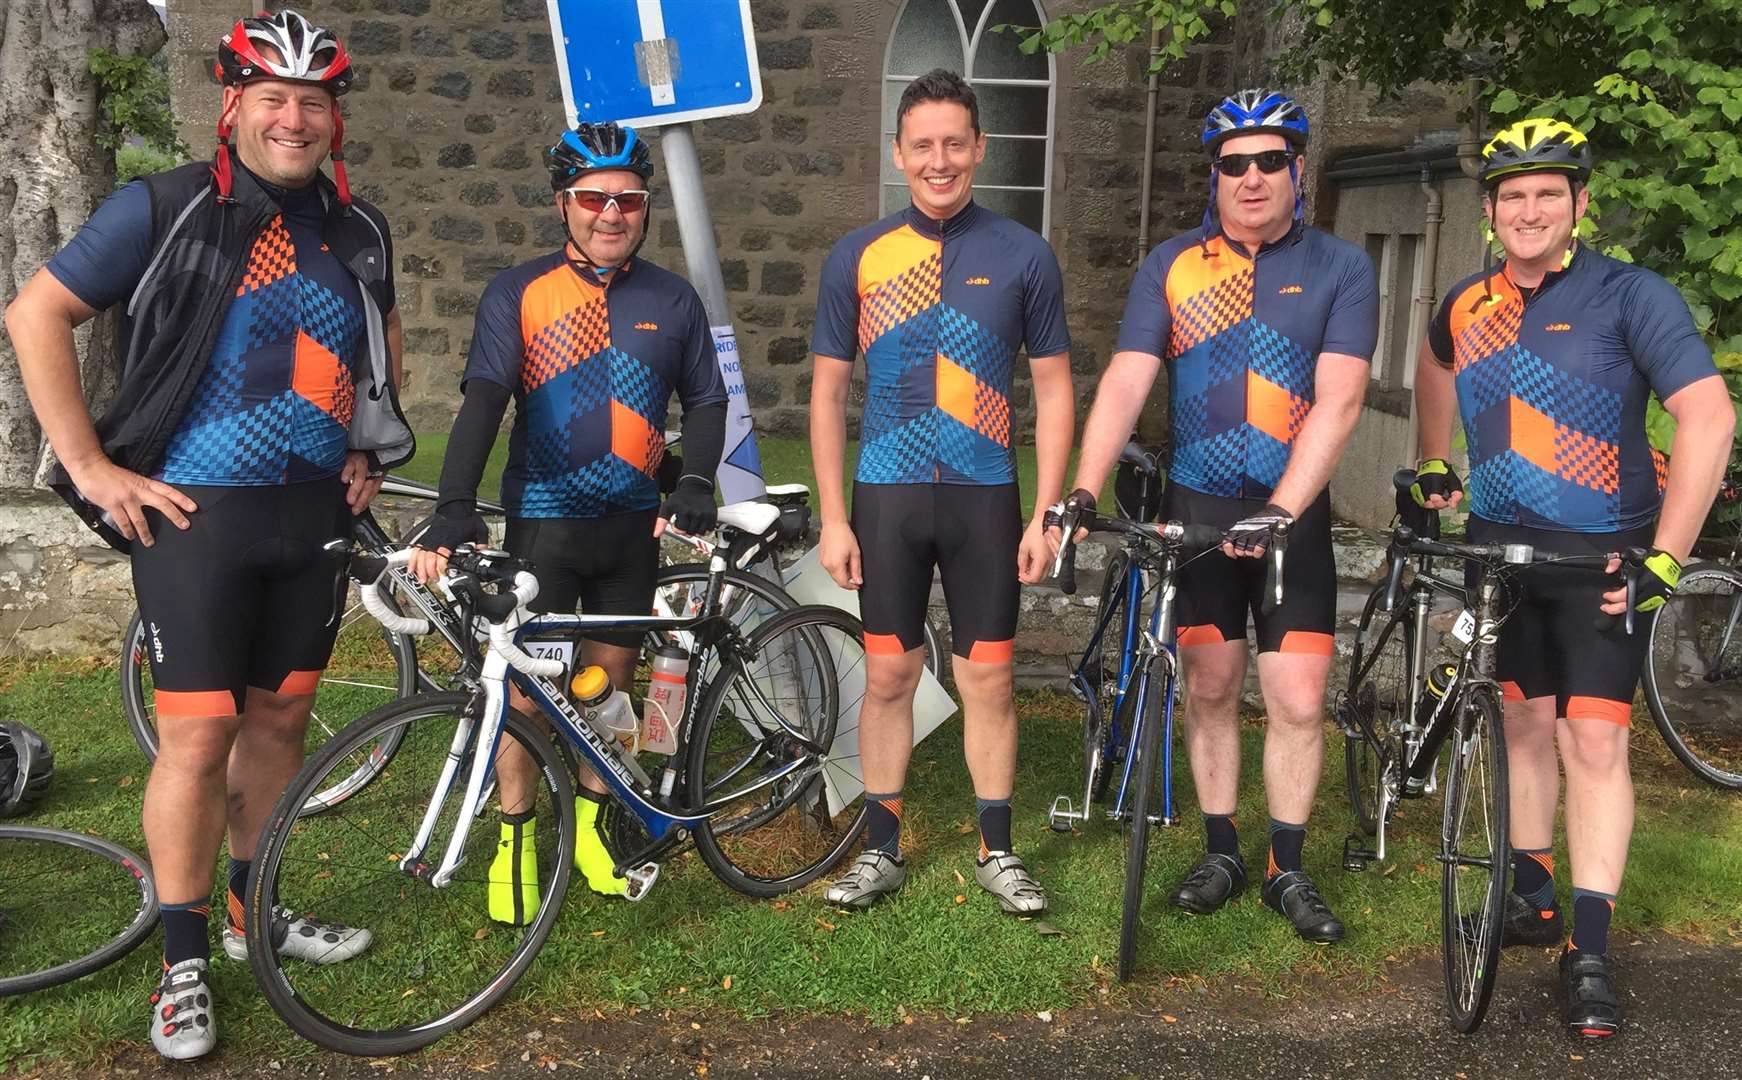 The Dynamic Edge cycle team prepares to do the North Coast 500 for the Archie Foundation.